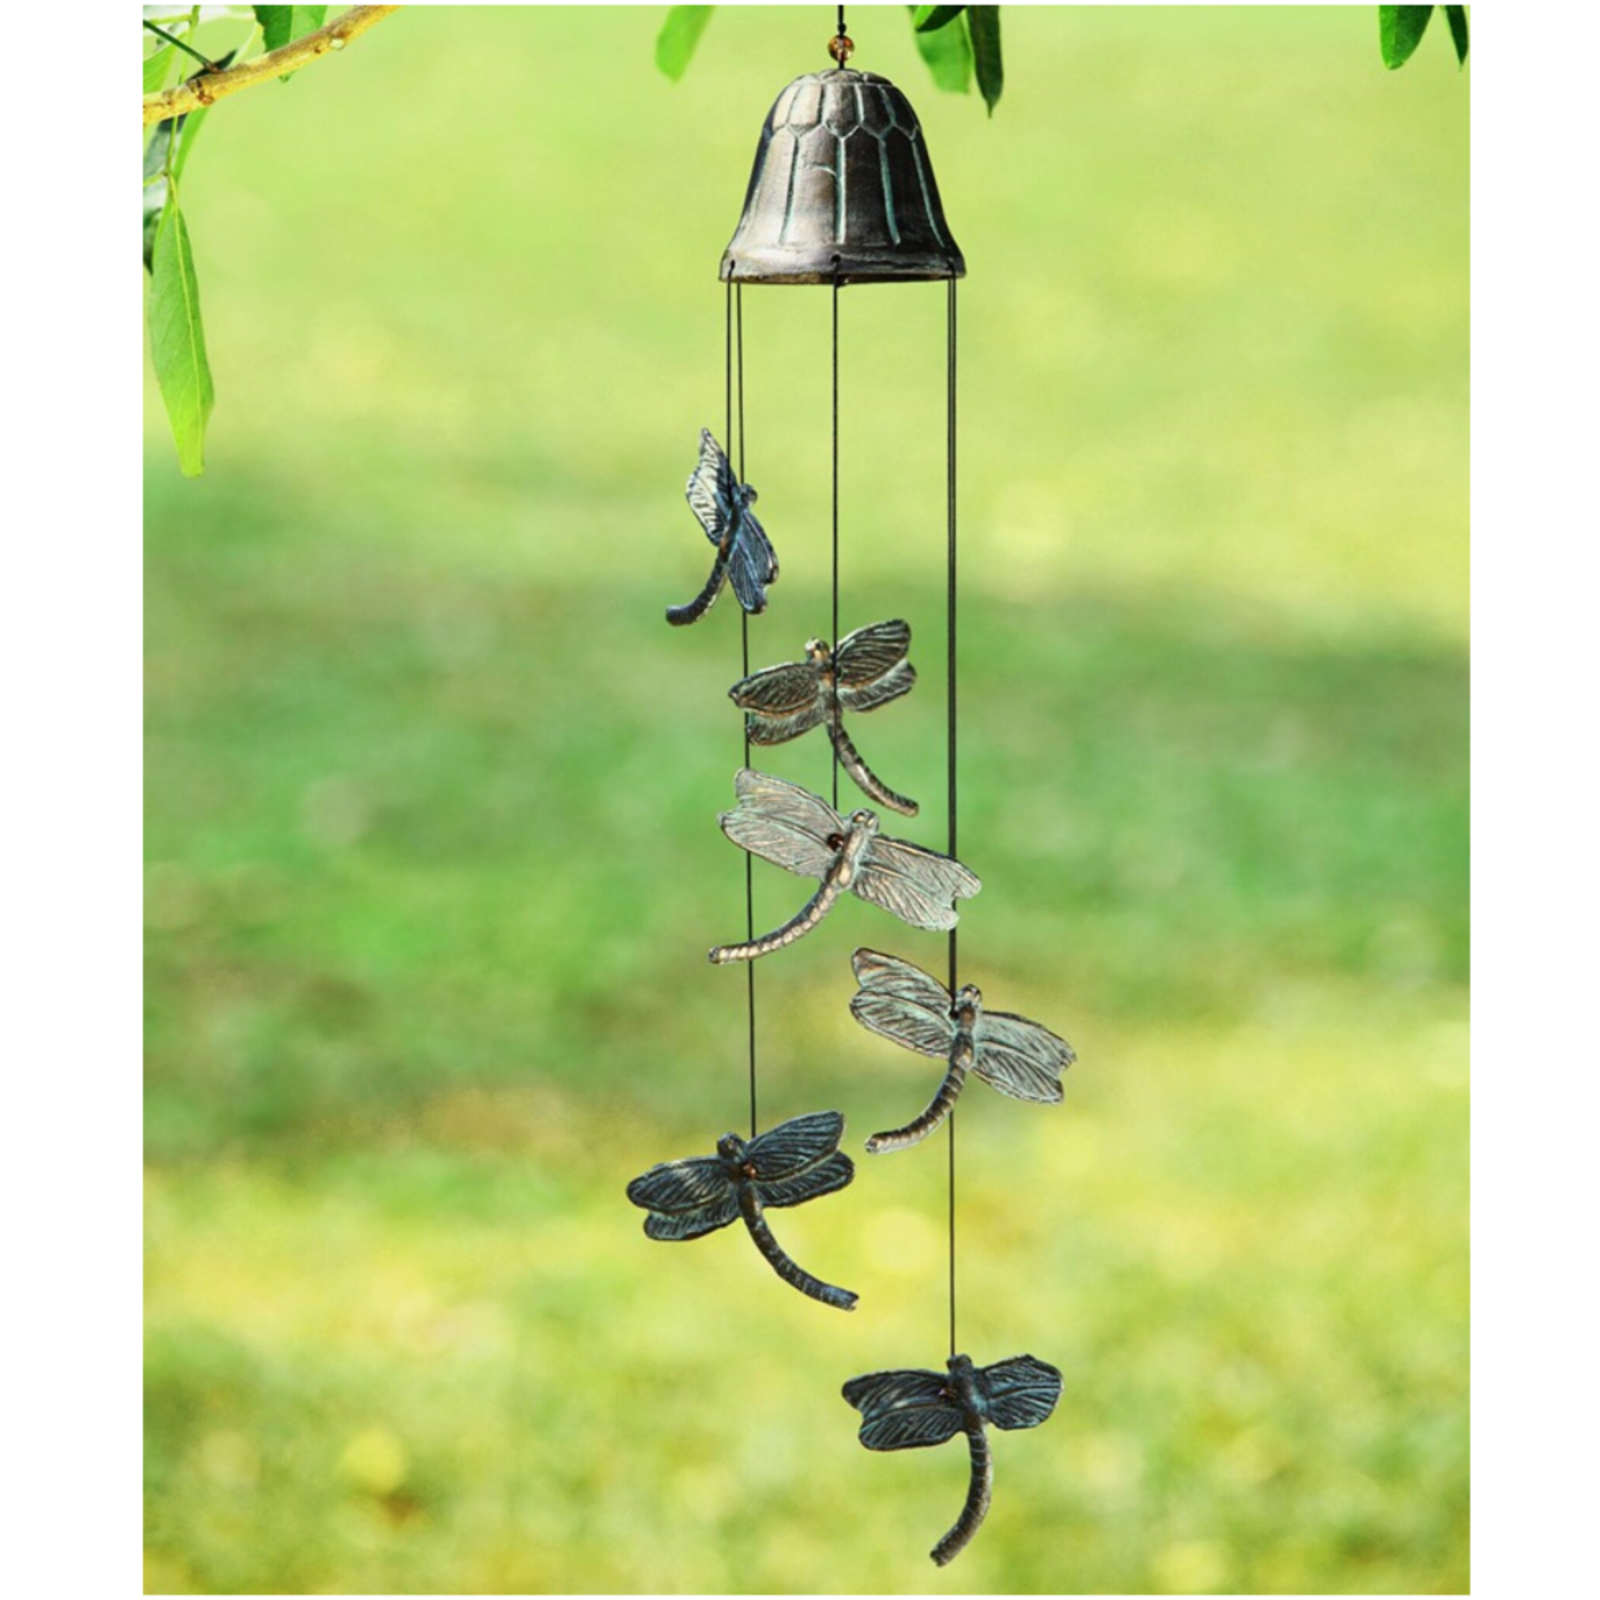 SPI Swooping Dragonfly Windchime 50840 loading=